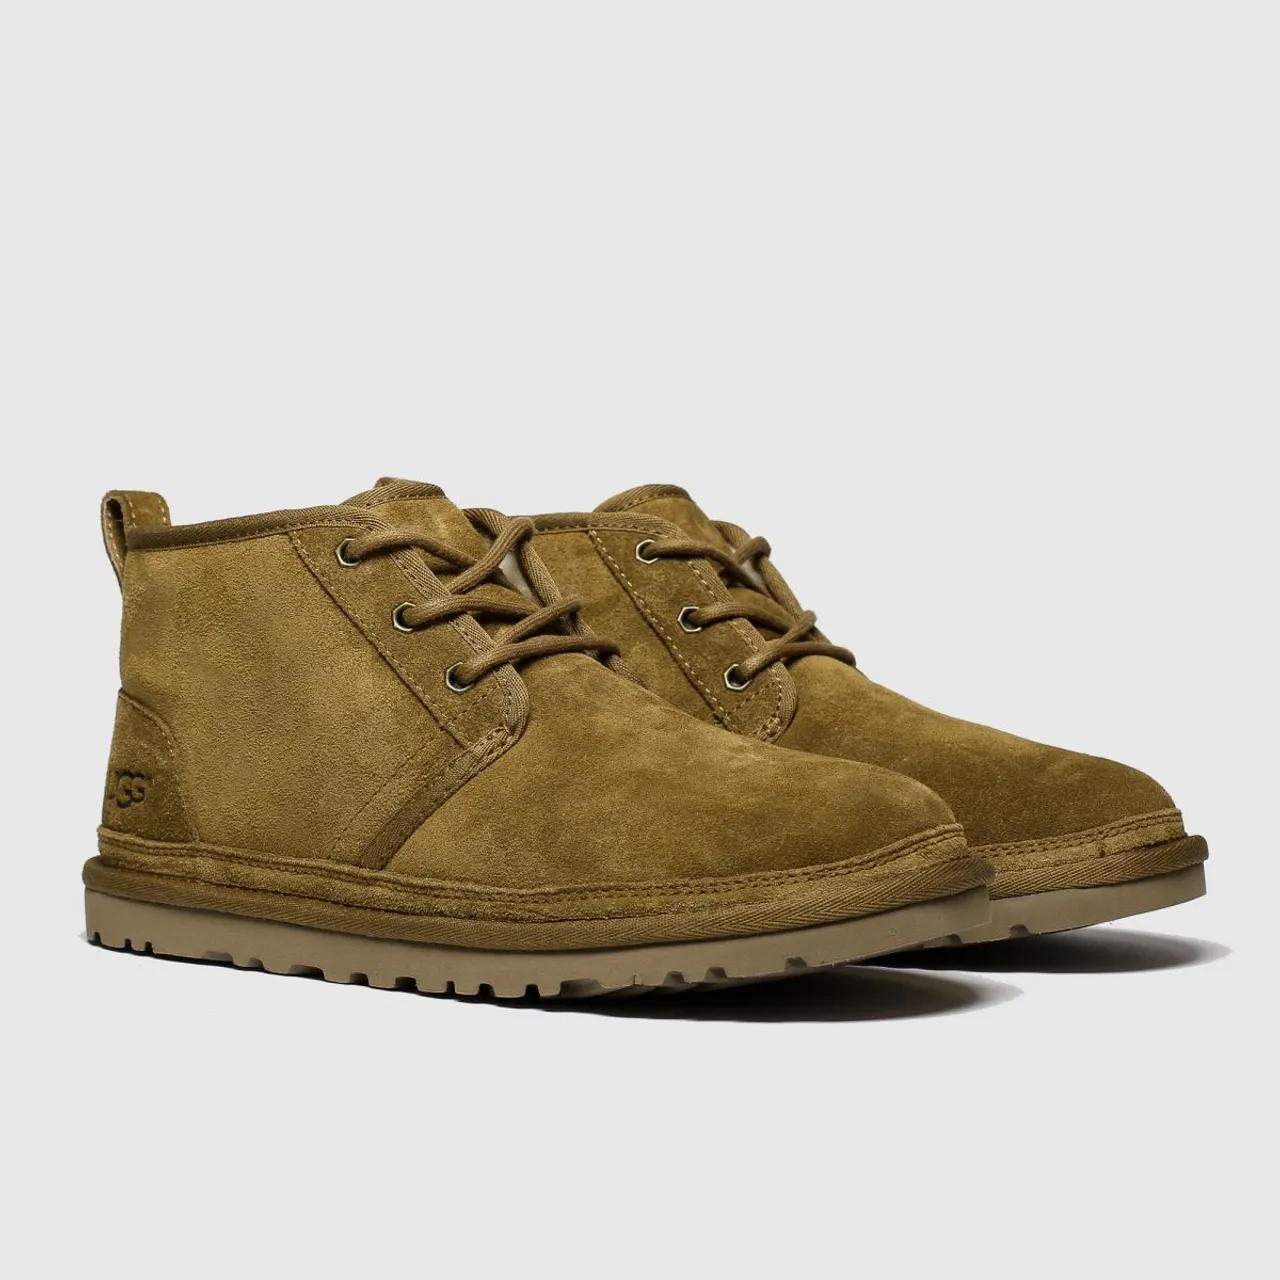 Ugg Neumel Boots In Tan